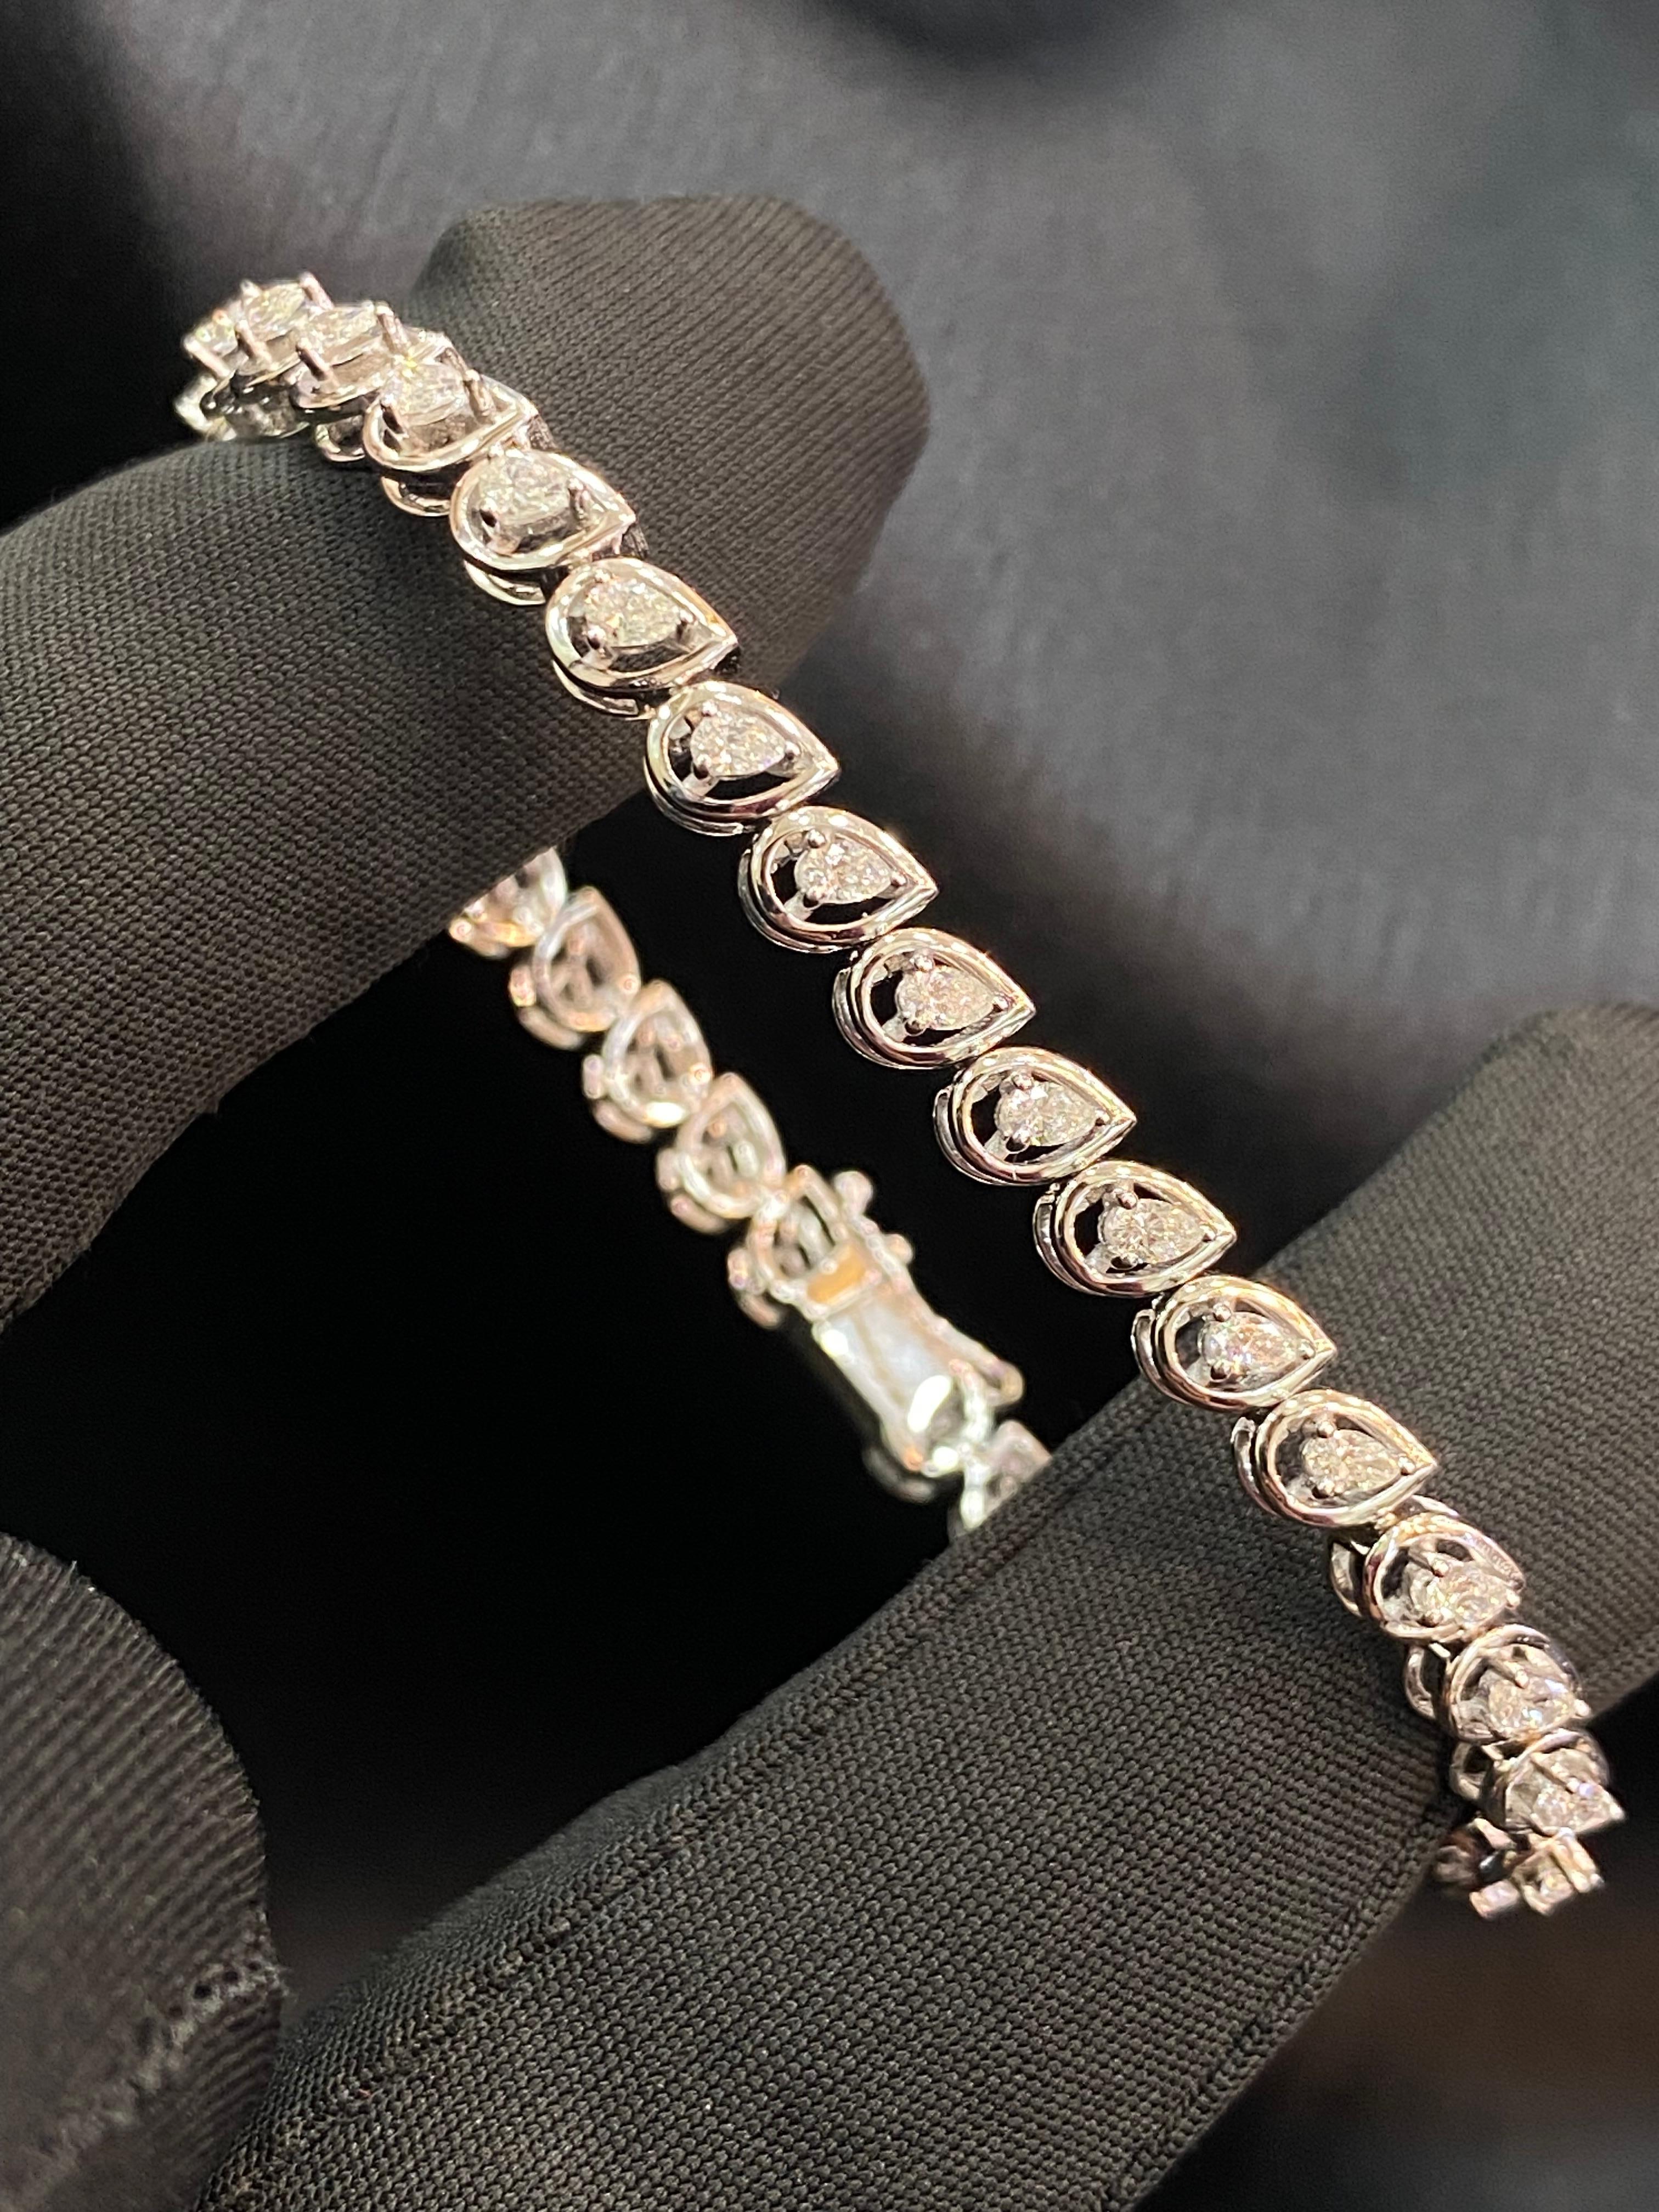 Indulge in the epitome of elegance with this bracelet, radiating glamour in its purest essence. Treat yourself to the mesmerizing beauty of this stunning 1.40 carat F/VS1 pear-shaped diamond bracelet, designed to illuminate your smile and exude